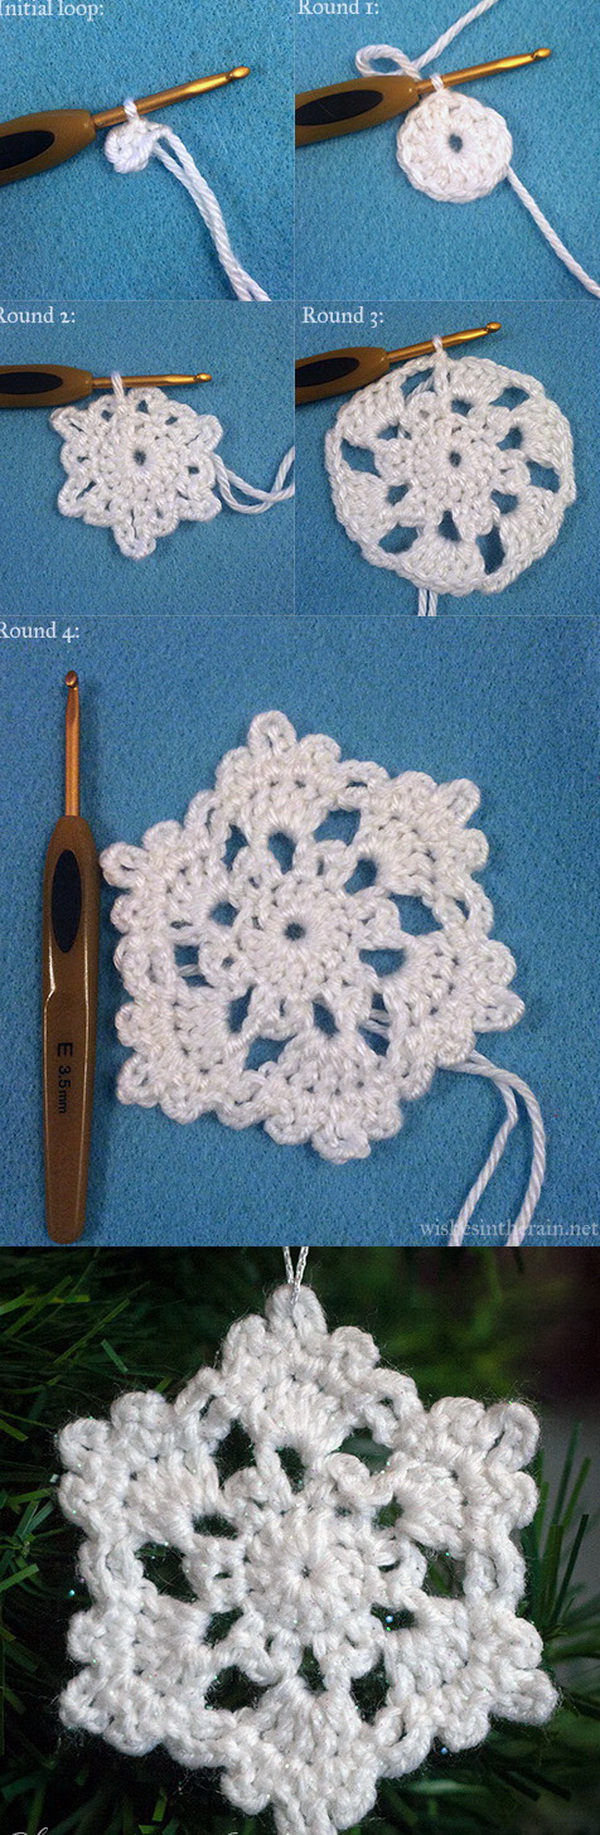 Crochet Snowflake Christmas Ornaments. This is an easy crochet pattern that works up quickly so you could easily make these within hours. Great for holiday crafting and make the perfect winter decor as Christmas ornaments, motifs for winter garlands, or appliques for gifts and accessories.